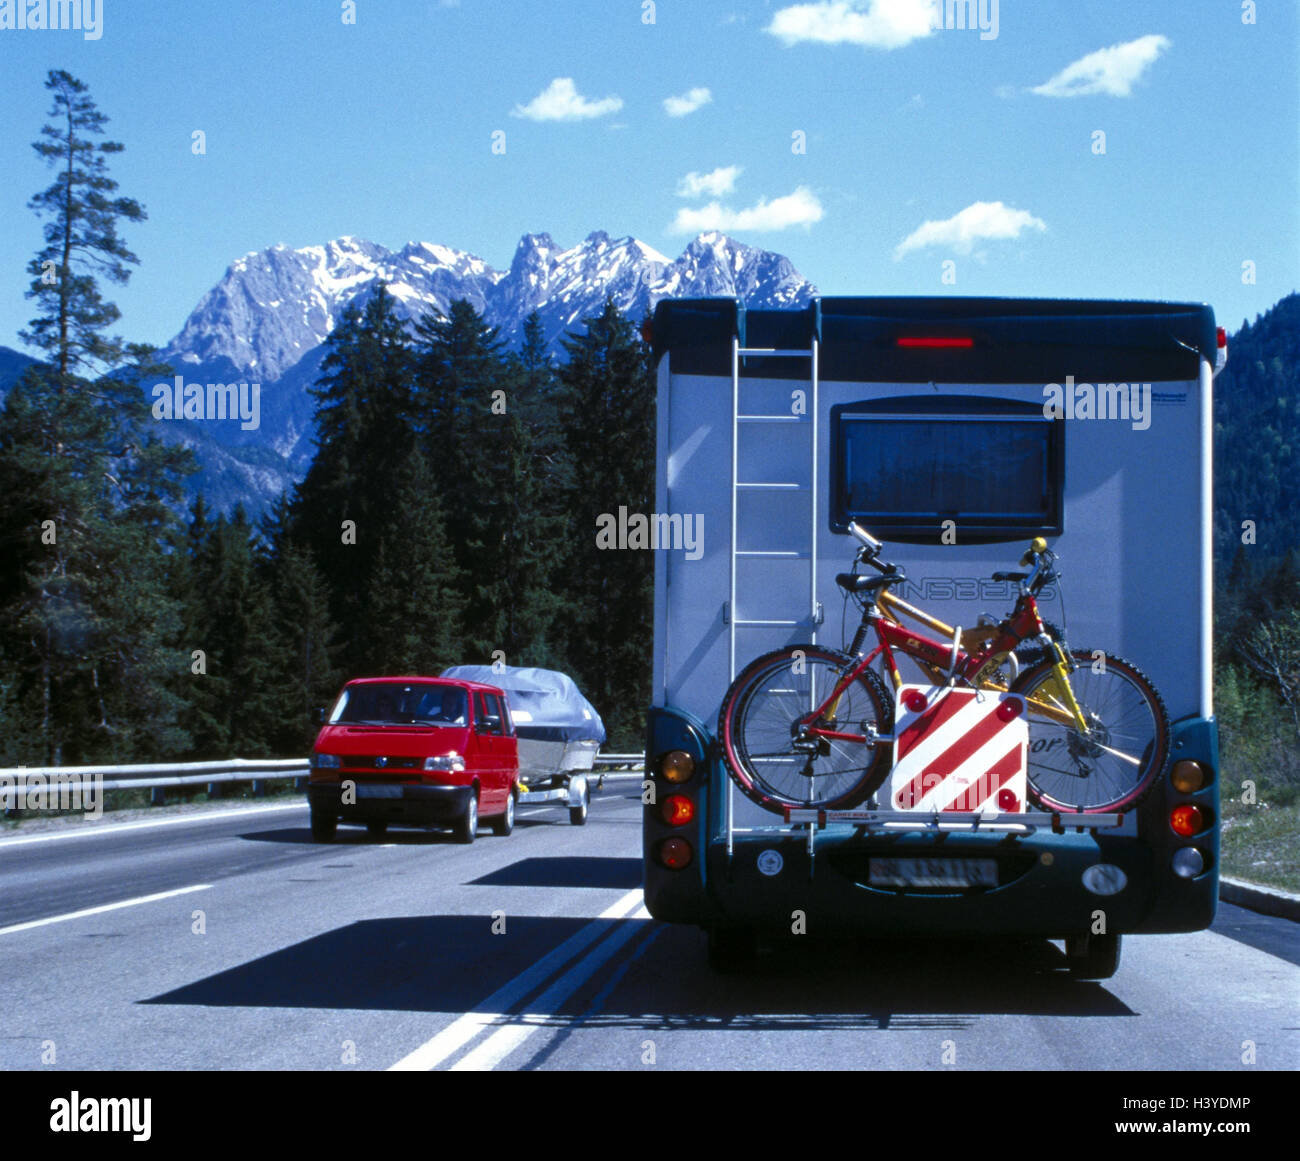 Federal highway, traffic, two-way traffic, hard shoulder, camper, back view, scenery, mountains, street, traffic, autorice, vacation, holiday trip, passenger car, car, trailer, boat trailer, boot Stock Photo